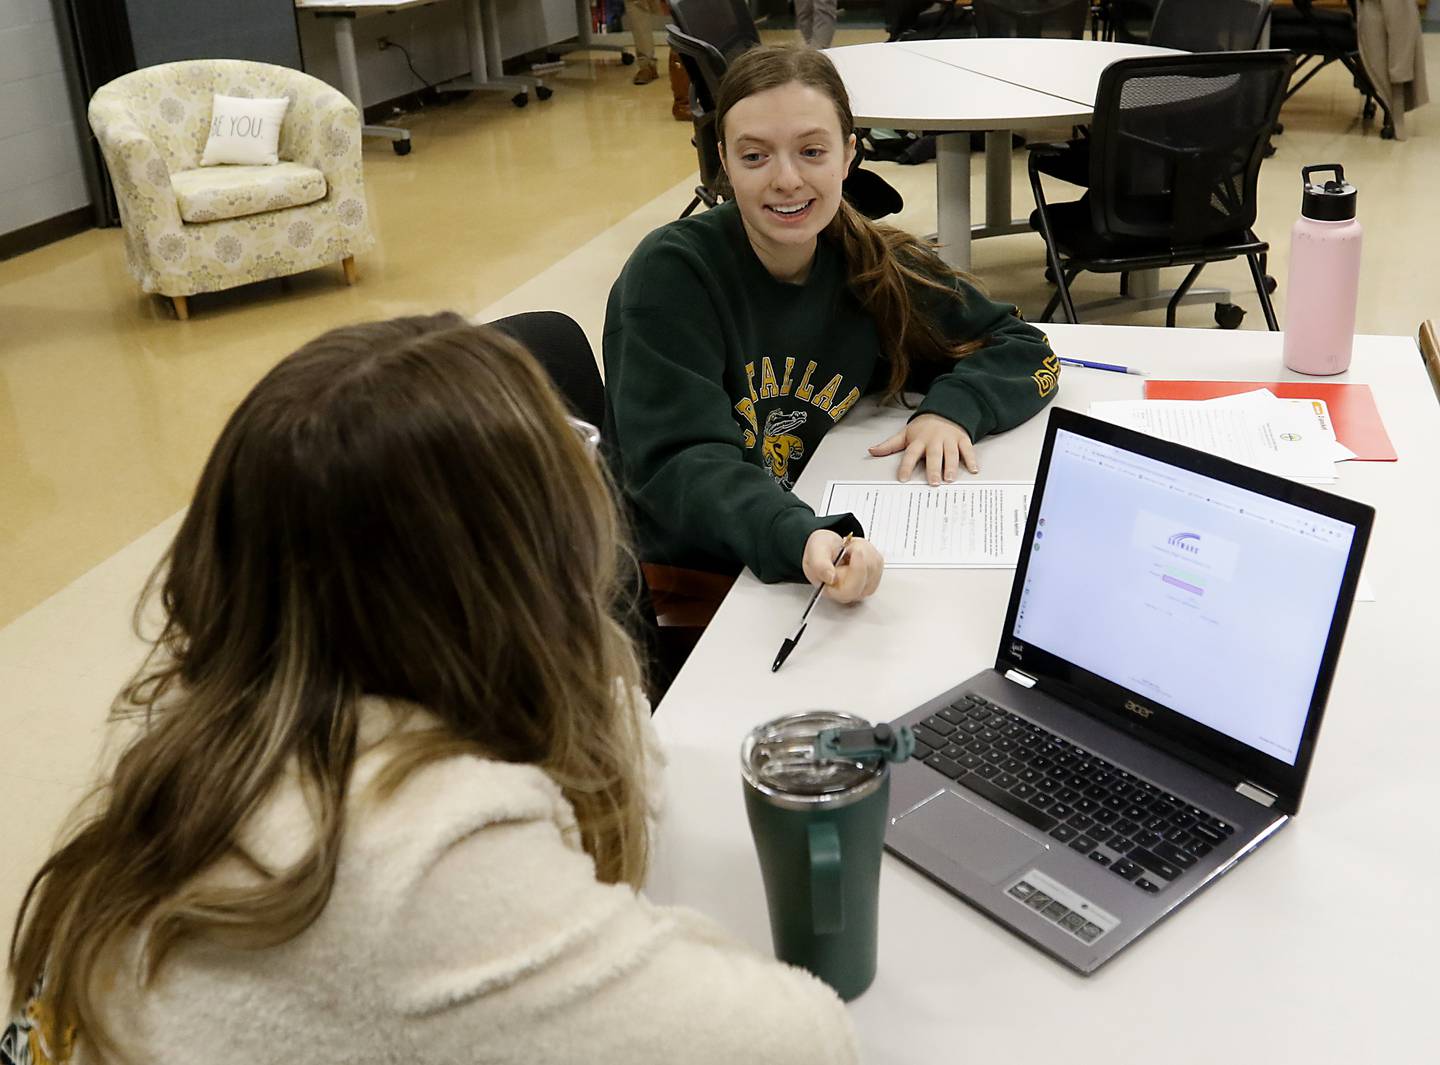 Hailey Baker, the college and career advisor at Crystal Lake South High School, helps senior Meg Norten fill out a scholarship application Thursday, Jan. 26, 2023, at the school in Crystal Lake. This year's senior class is made up of students who began their high school careers dealing with COVID-19.